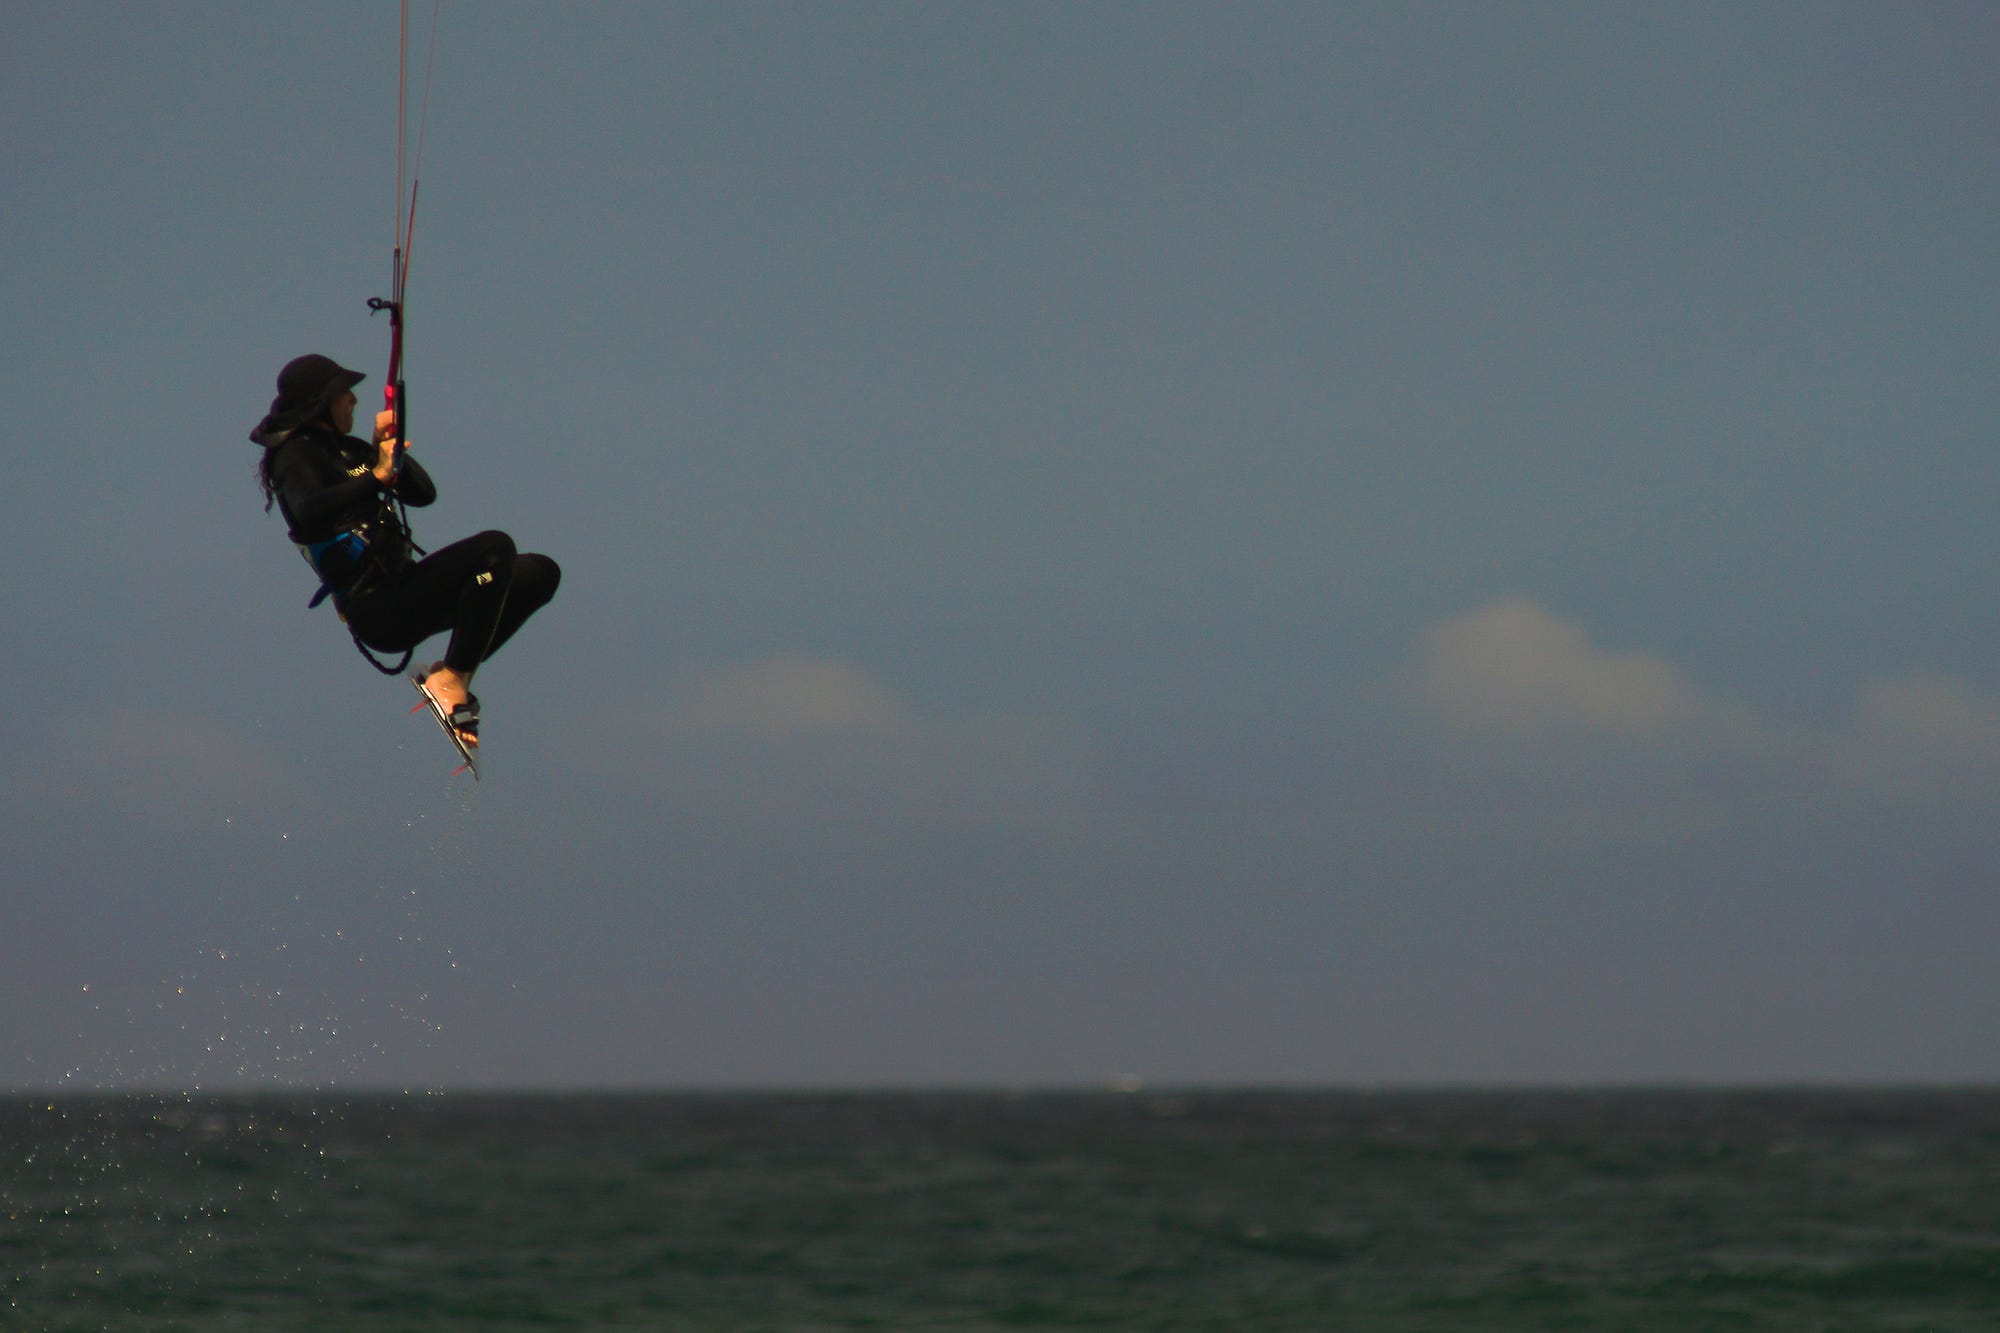 An image of Uzi windsurfing — you can’t see the parachute, just the sky, the ocean and Uzi dangling from a harness in mid-air.